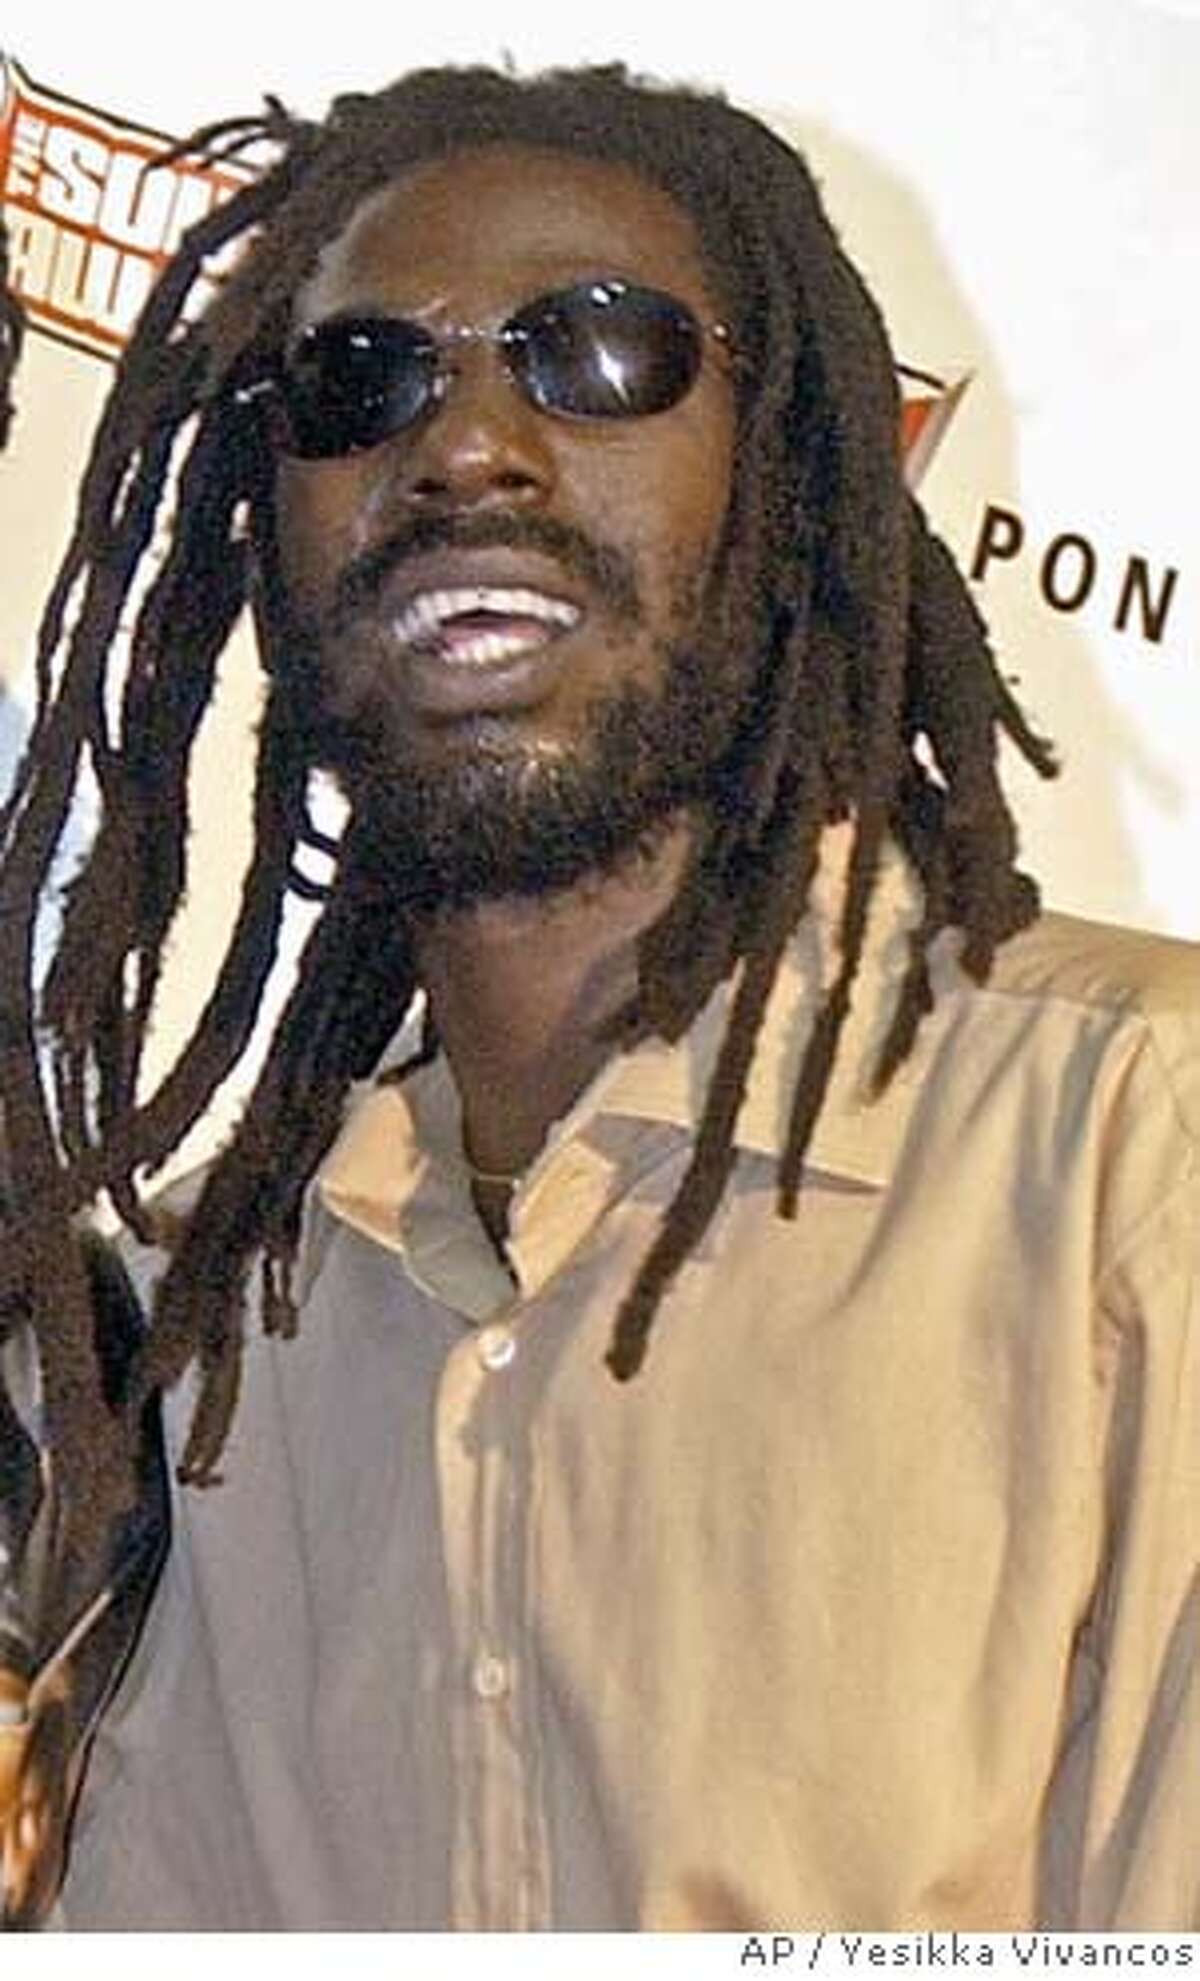 Buju Banton shows at the Mezzanine and Sound Factory clubs were canceled. Associated Press file photo, 2003, by Yesikka Vivancos